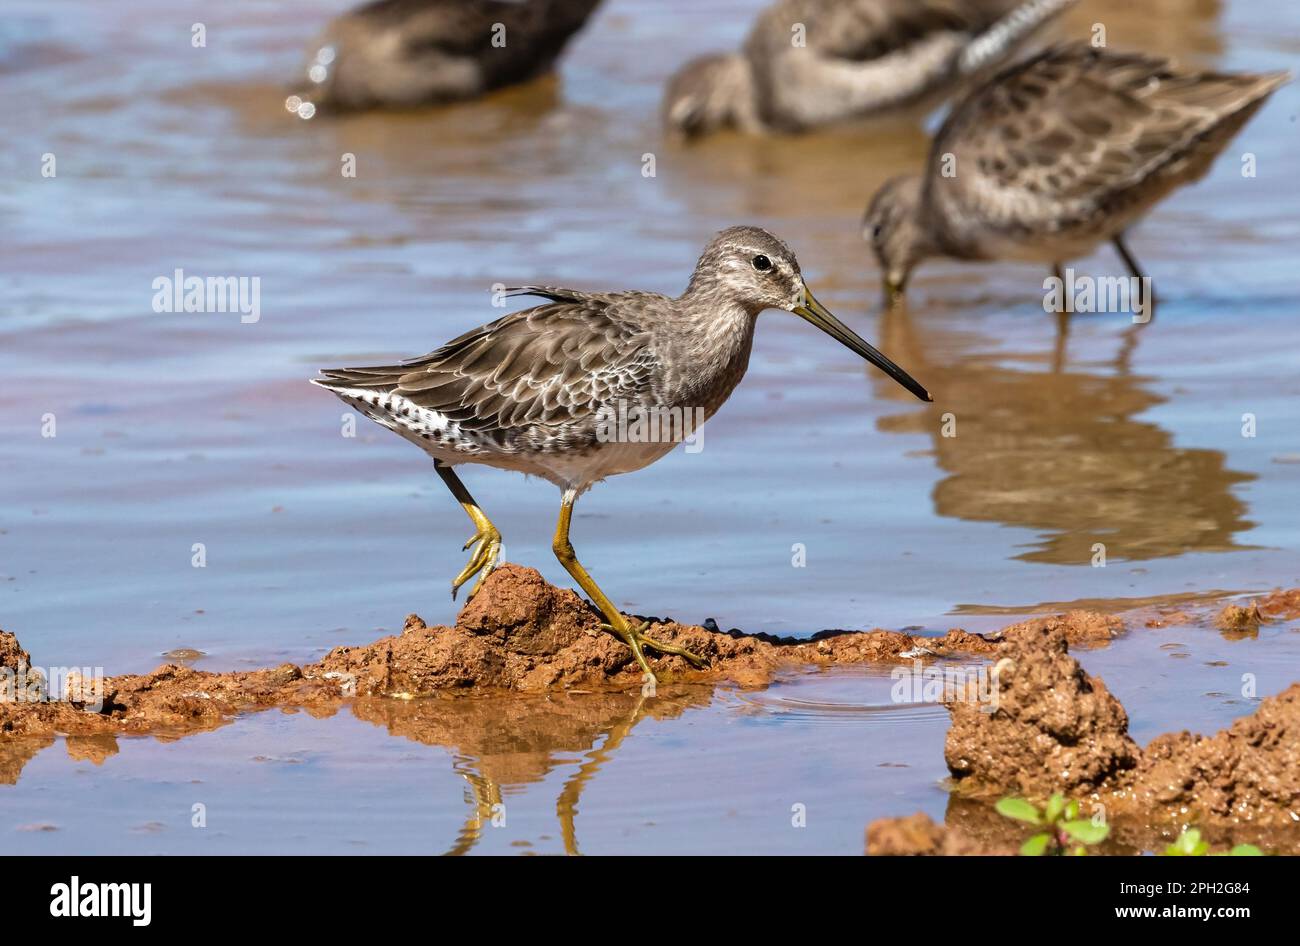 A Long-billed Dowitcher in non-breeding plumage walks over a mud mound while other Dowitchers feed in the background in a mudflats habitat environment Stock Photo